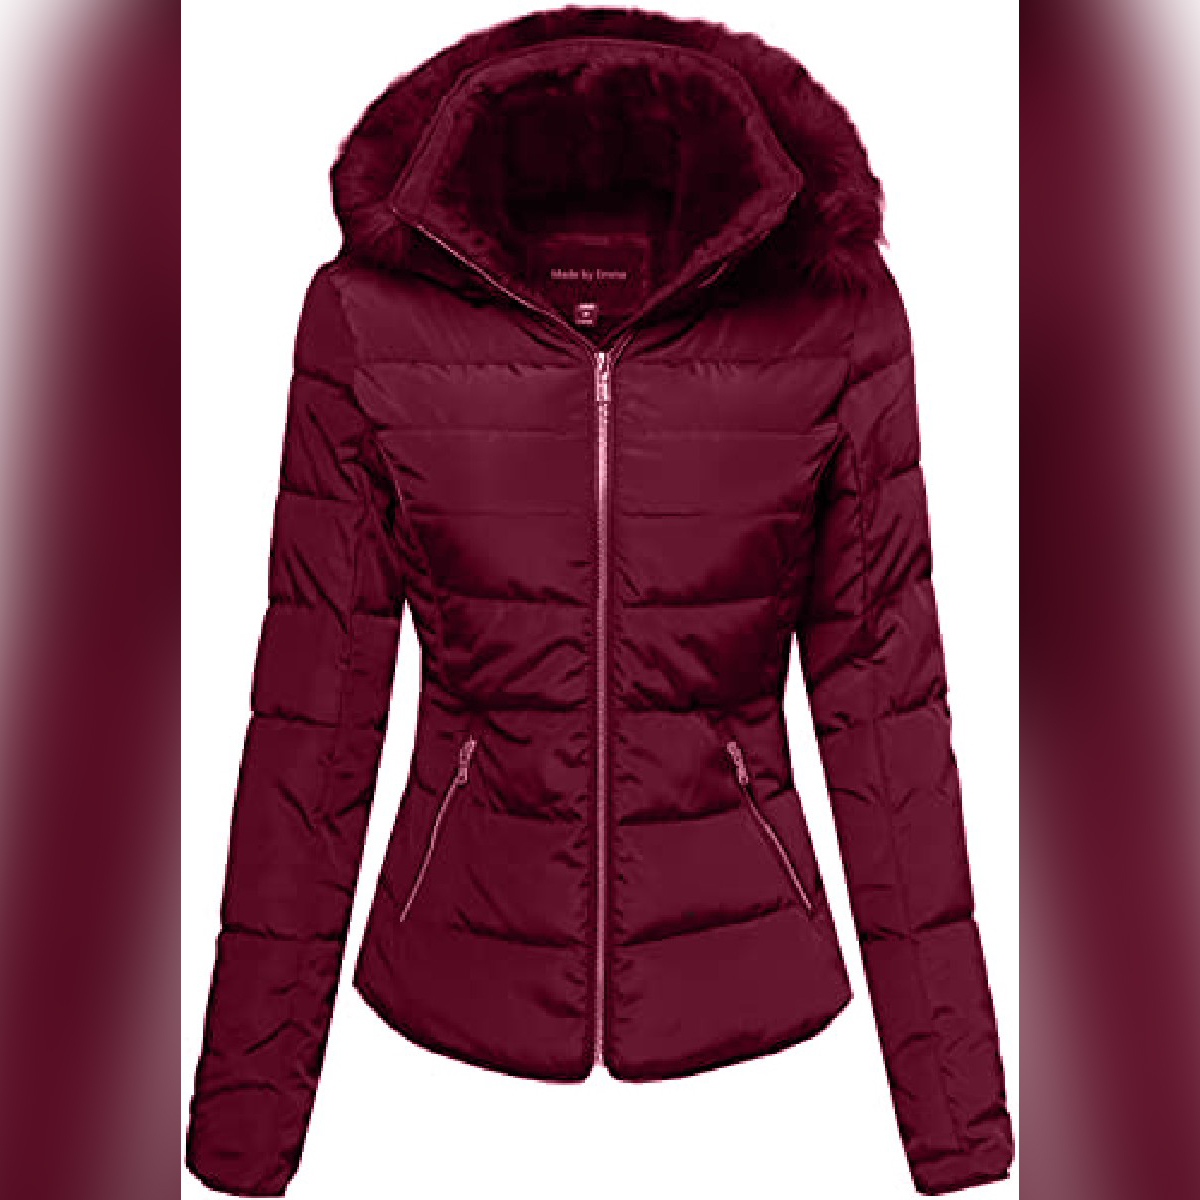 Women's Maroon Fit Quilted Puffer Jacket Price in Pakistan - View ...